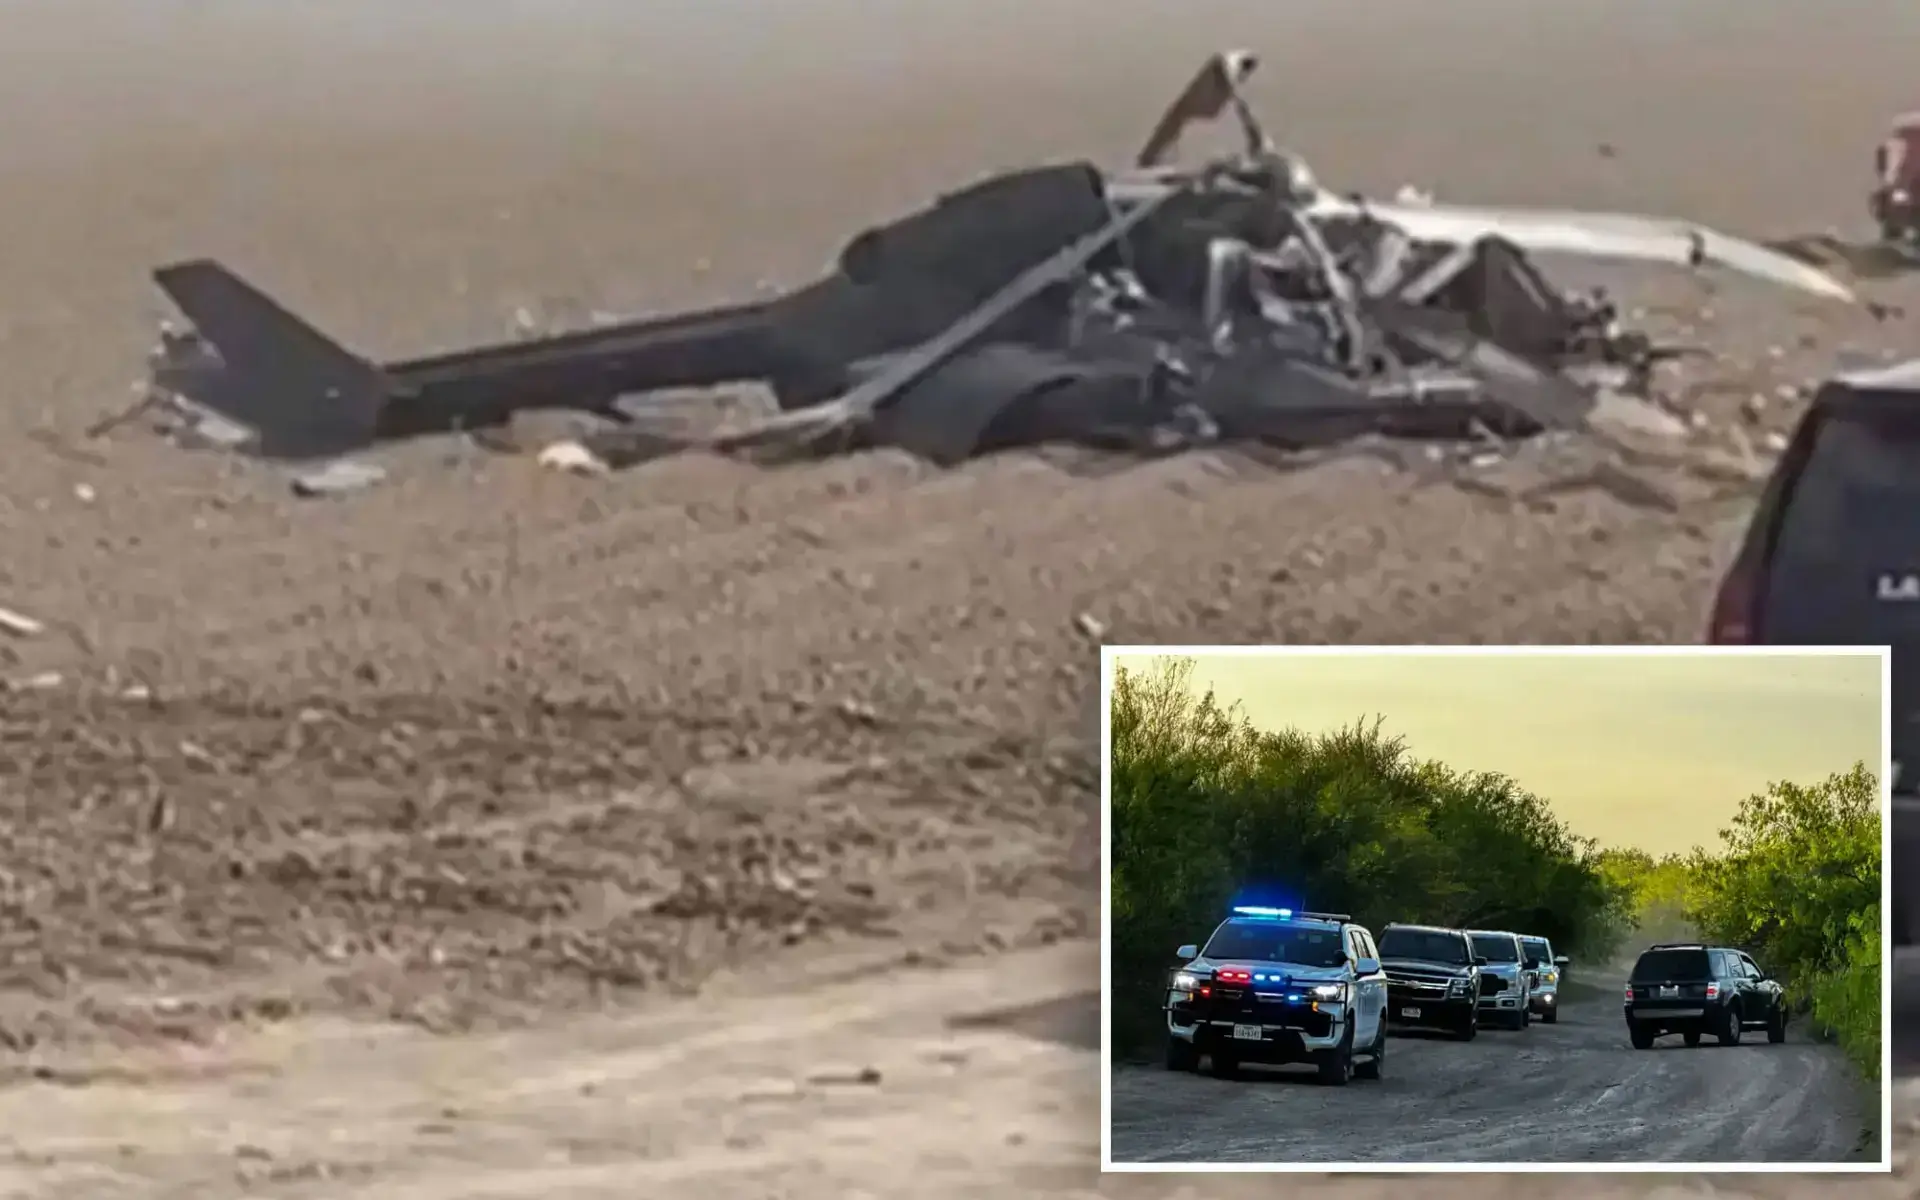 National Guard Helicopter Crash Near Texas Border, 2 killed, 1 Injured: Officials